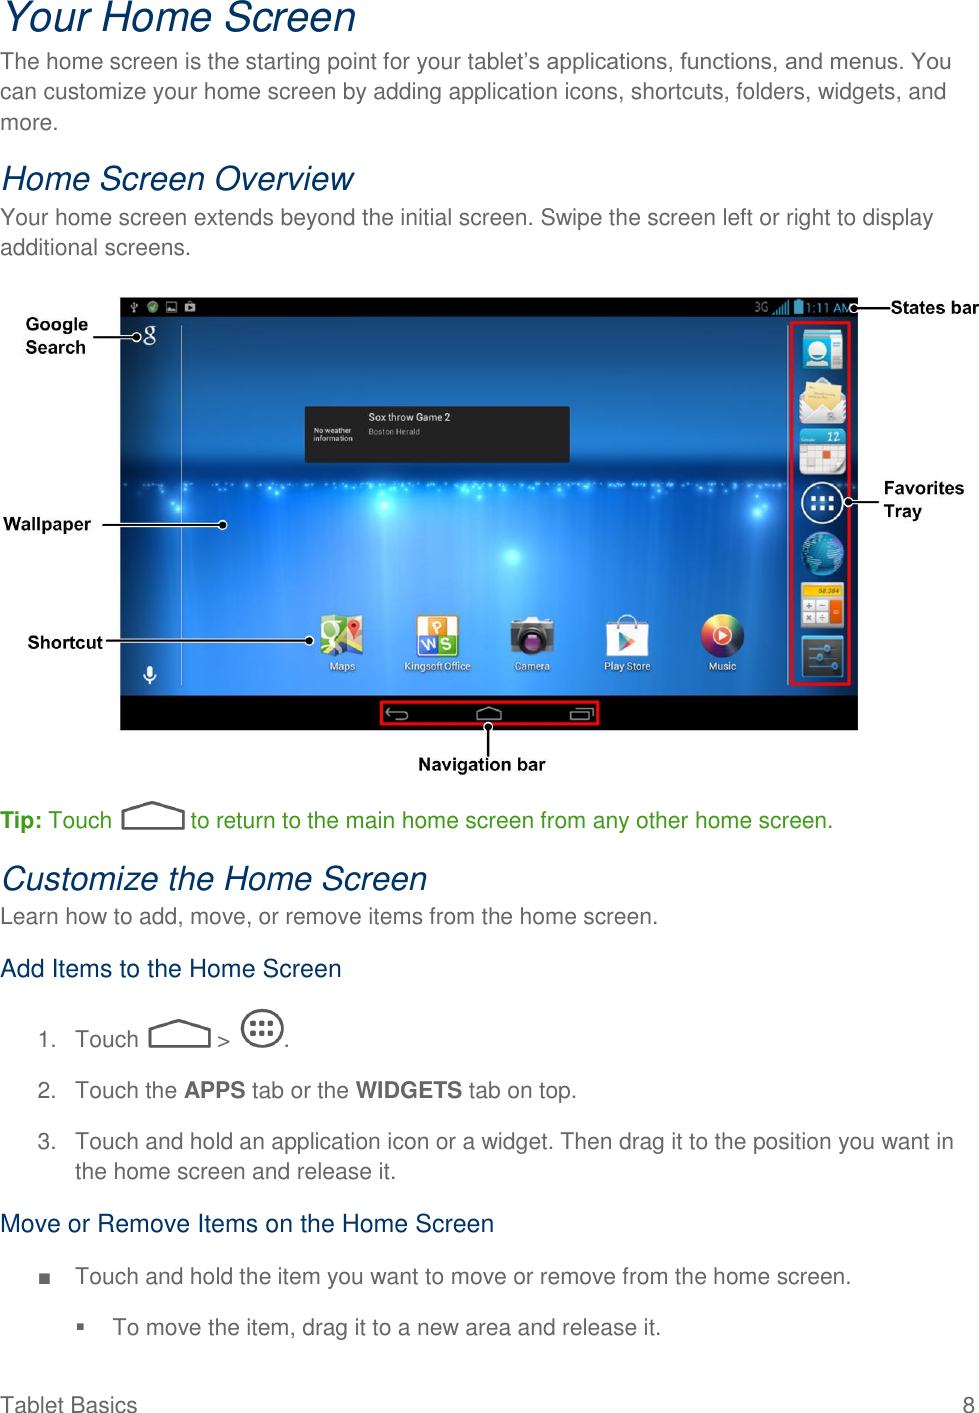  Tablet Basics  8 Your Home Screen The home screen is the starting point for your tablet’s applications, functions, and menus. You can customize your home screen by adding application icons, shortcuts, folders, widgets, and more.  Home Screen Overview Your home screen extends beyond the initial screen. Swipe the screen left or right to display additional screens.   Tip: Touch   to return to the main home screen from any other home screen.  Customize the Home Screen Learn how to add, move, or remove items from the home screen. Add Items to the Home Screen 1.  Touch   &gt;  . 2.  Touch the APPS tab or the WIDGETS tab on top. 3.  Touch and hold an application icon or a widget. Then drag it to the position you want in the home screen and release it. Move or Remove Items on the Home Screen ■  Touch and hold the item you want to move or remove from the home screen.   To move the item, drag it to a new area and release it. 